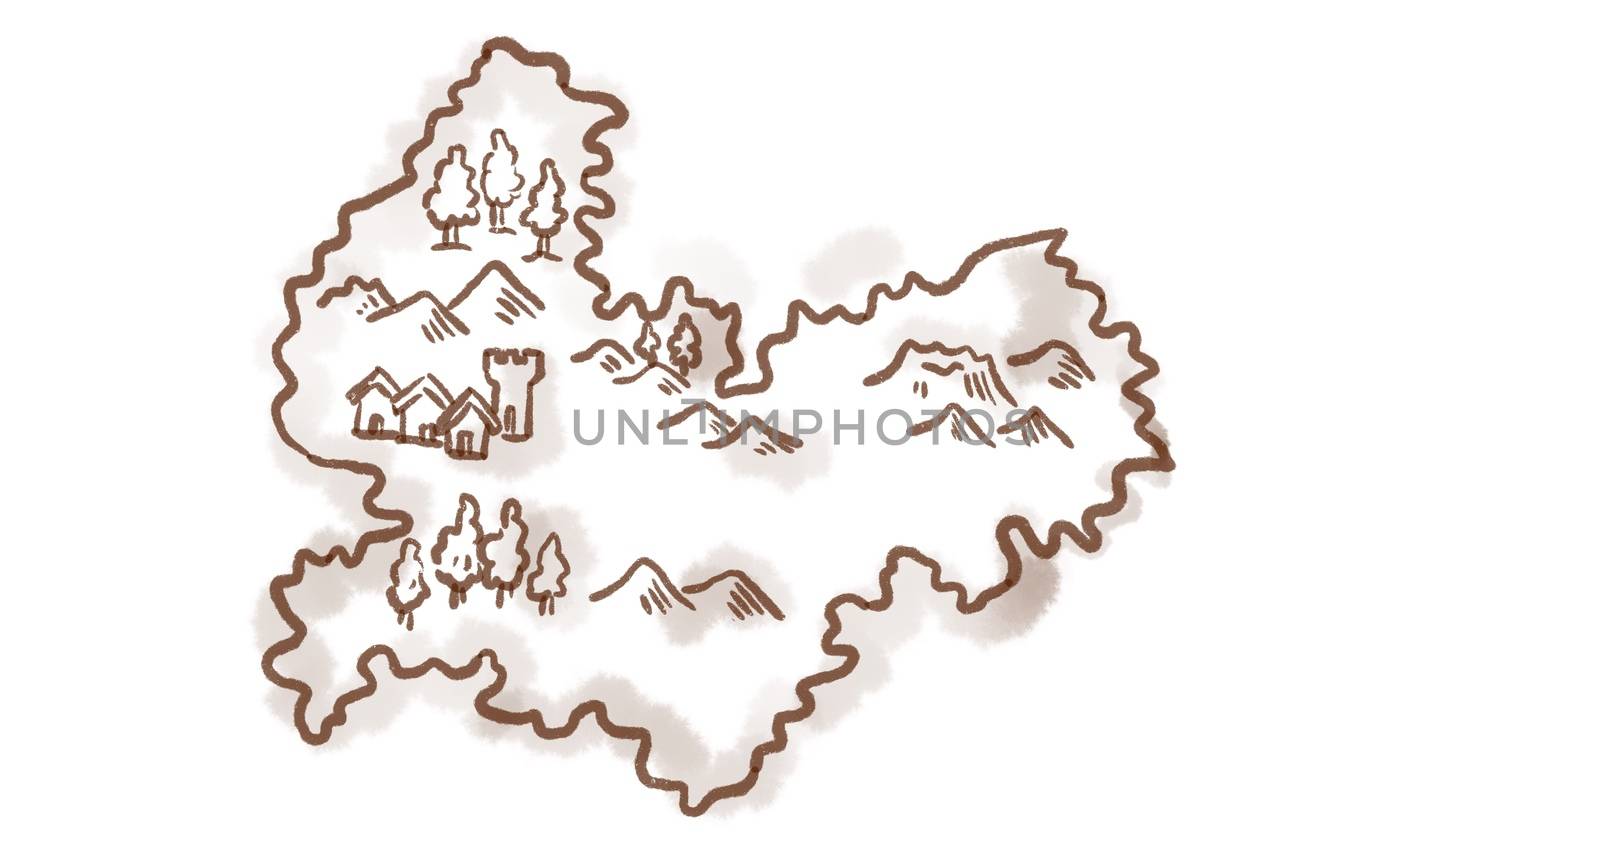 Retro style sketch drawing of a vintage medieval fantasy map of an island on white background.